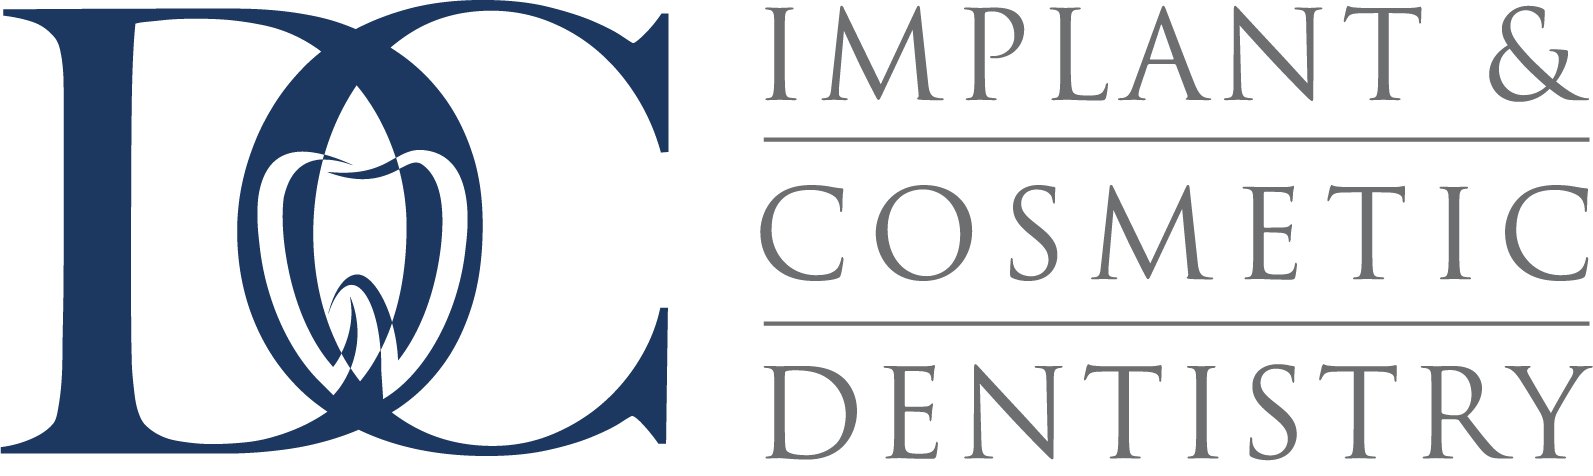 DC Implant & Cosmetic Dentistry logo